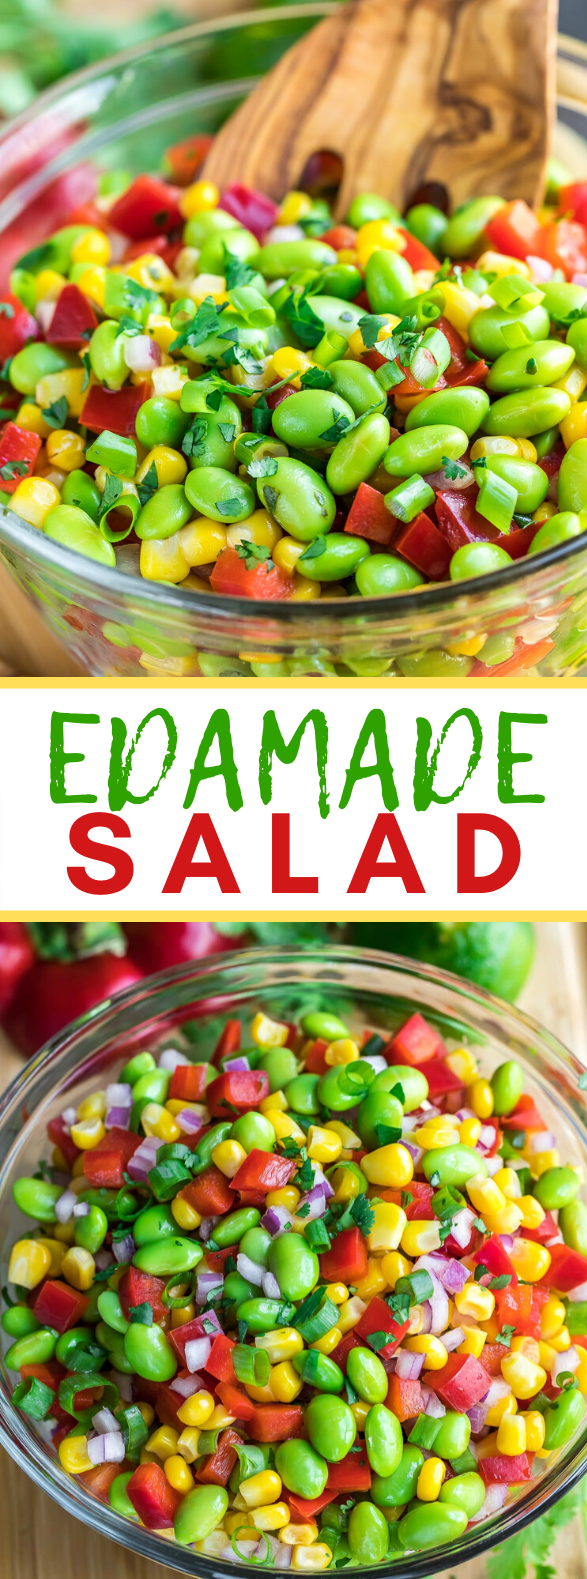 EDAMAME SALAD WITH CILANTRO LIME DRESSING #vegetarian #healthy